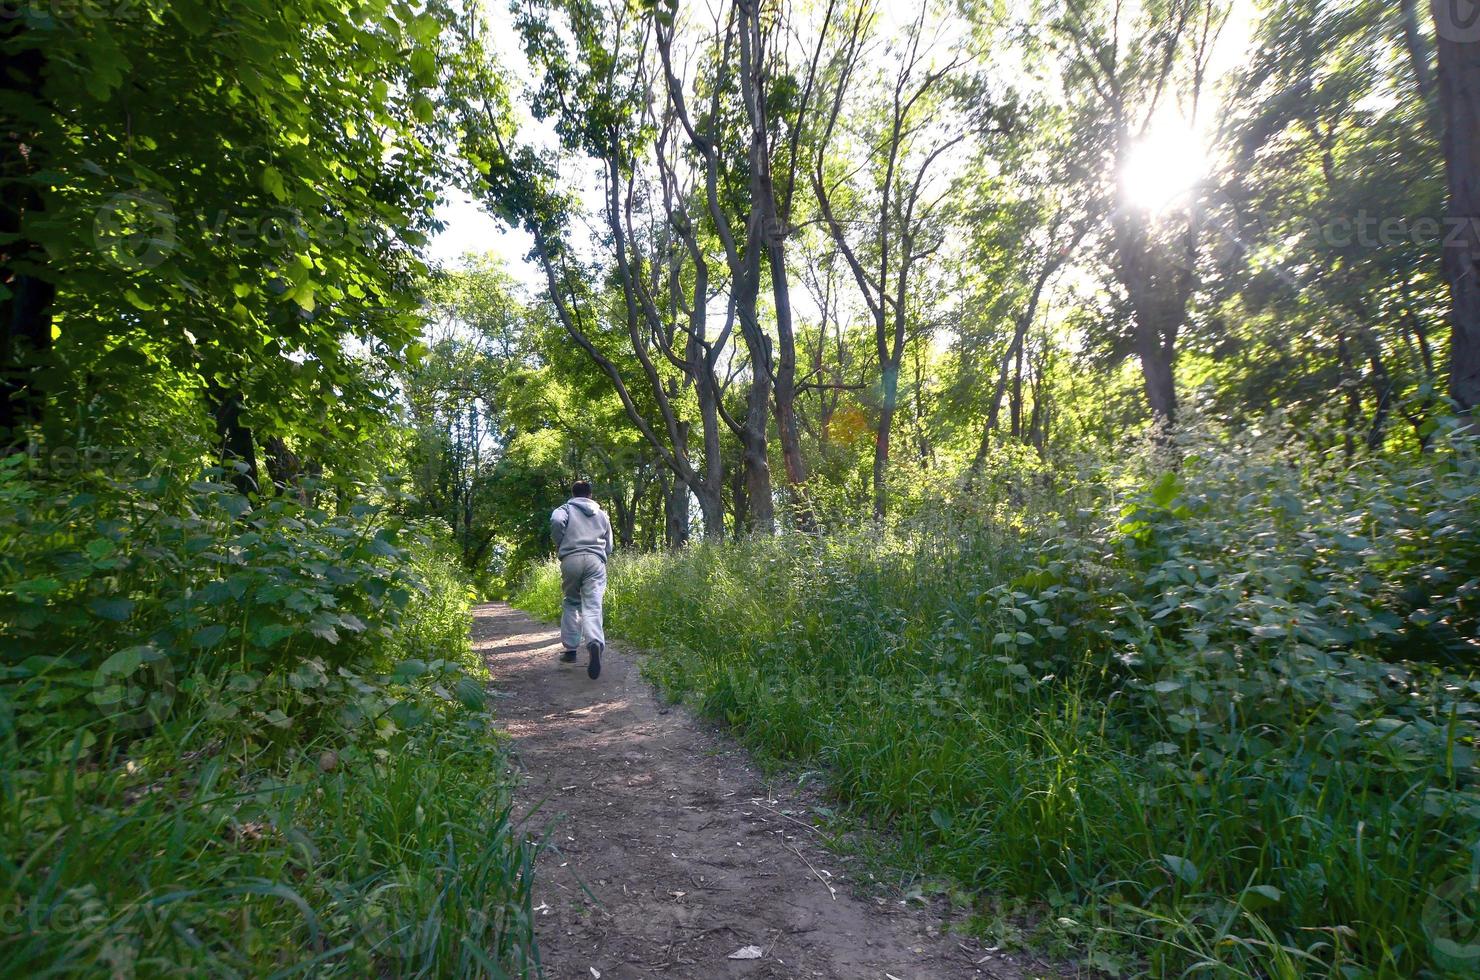 A young guy in a gray sports suit runs along the path among the photo